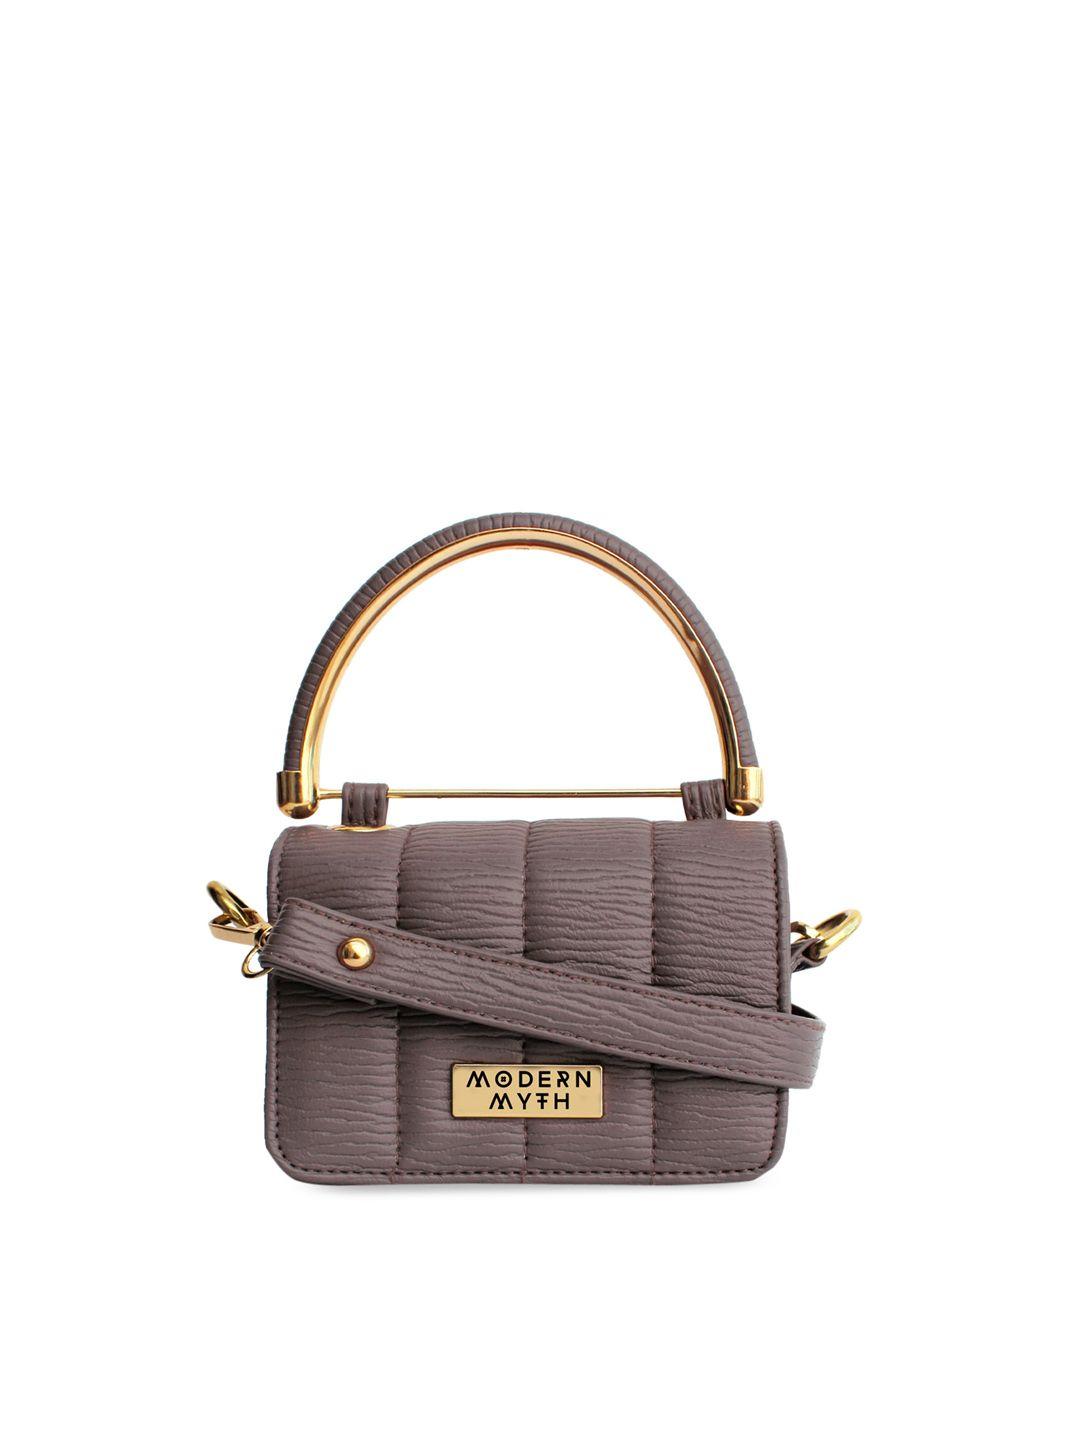 modern myth grey textured structured handheld bag with quilted